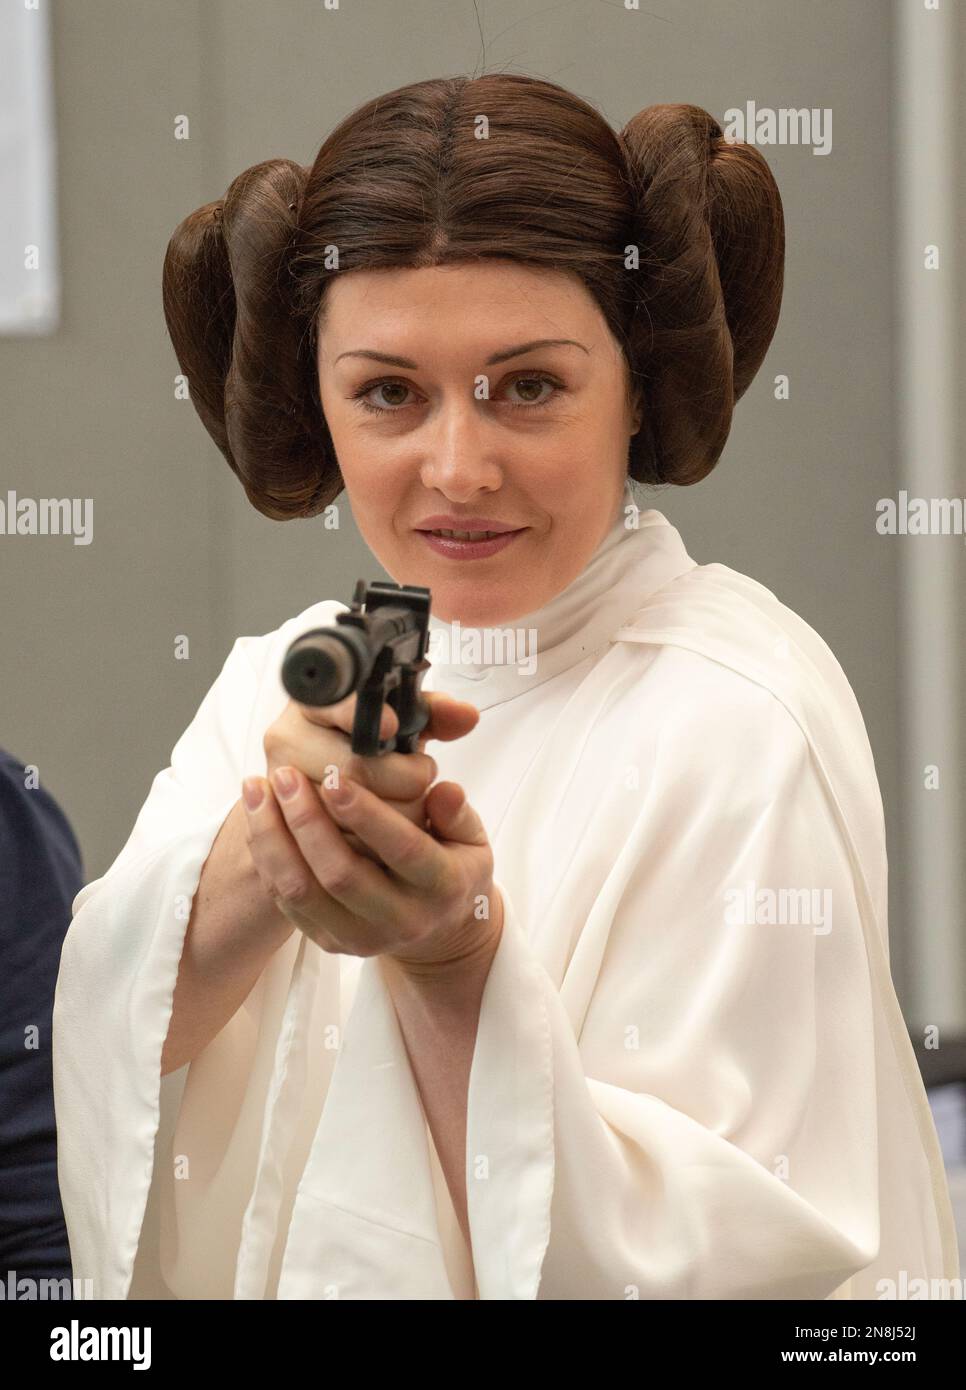 Cosplaying young woman dressed as Princess Leia character from the film Star Wars at the London Film Comic Con, held at Olympia London event venue. Stock Photo